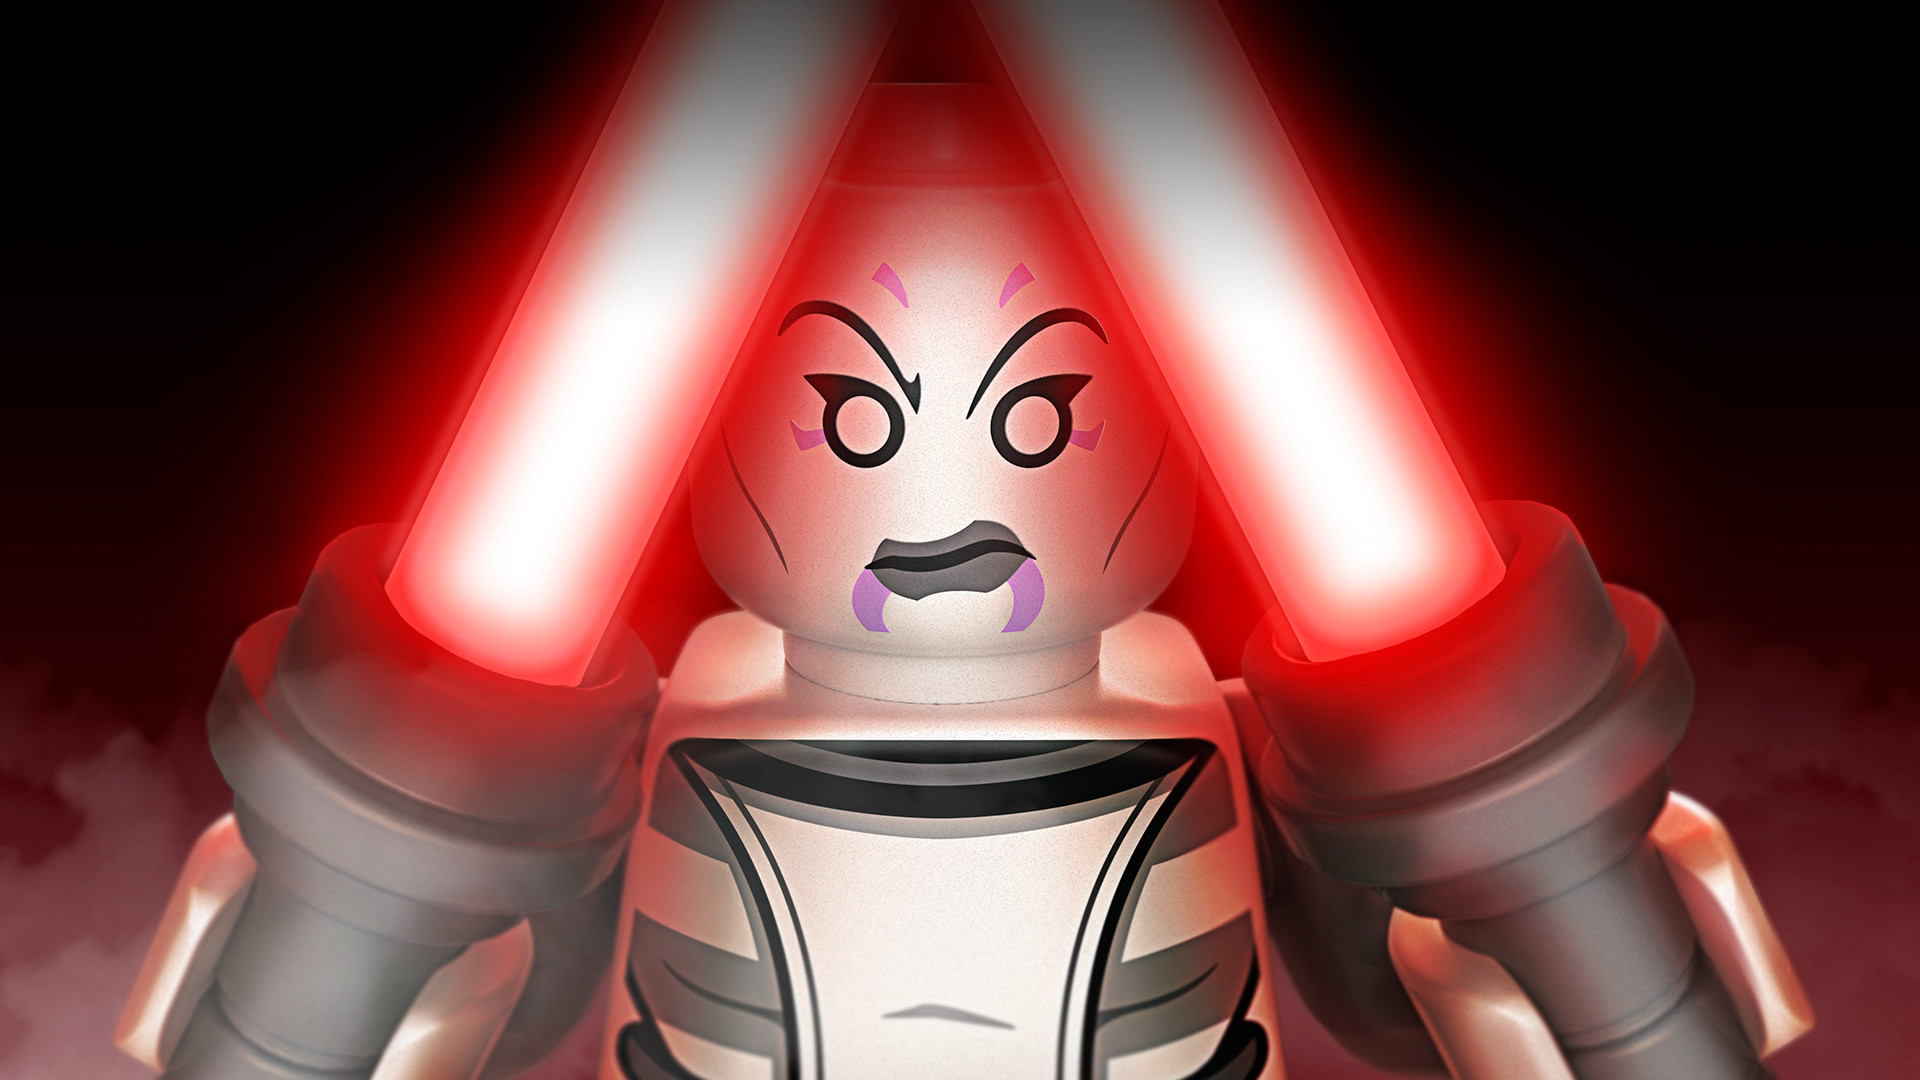 LEGO Star Wars: The Force Awakens - The Clone Wars Character Pack DLC Steam CD Key 1.68 $